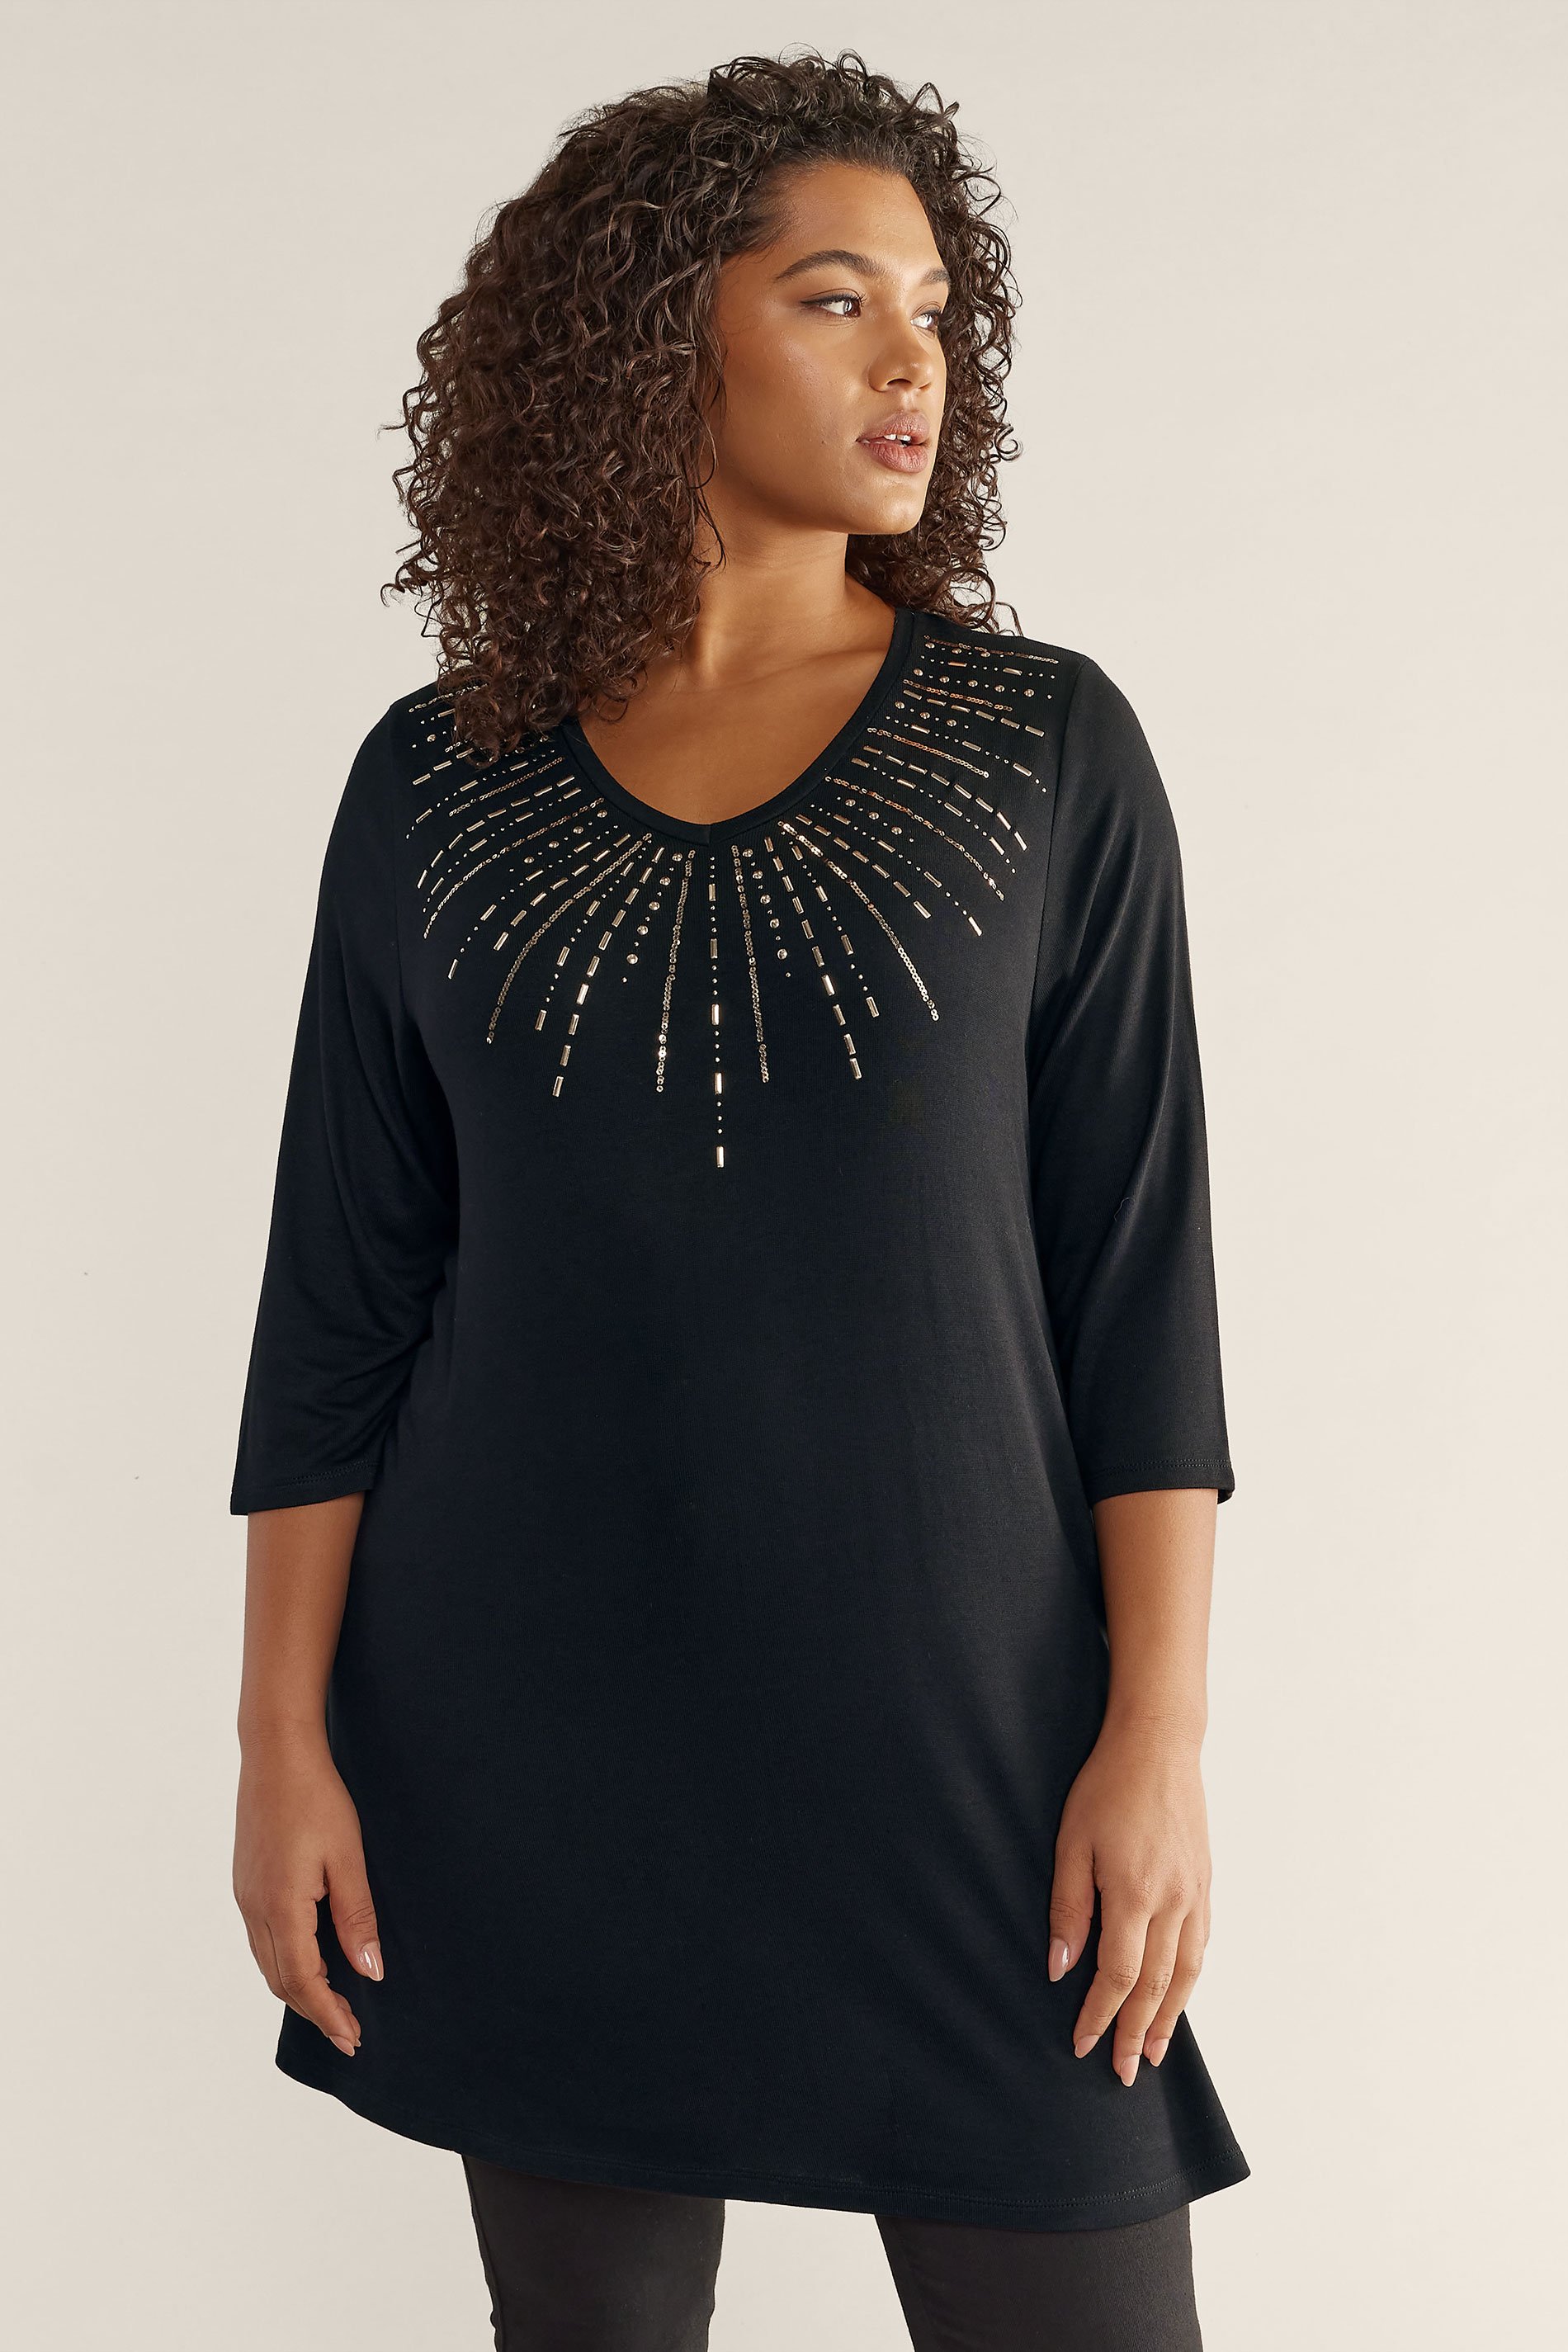 YOURS Plus Size Black Lace Sequin Embellished Swing Top